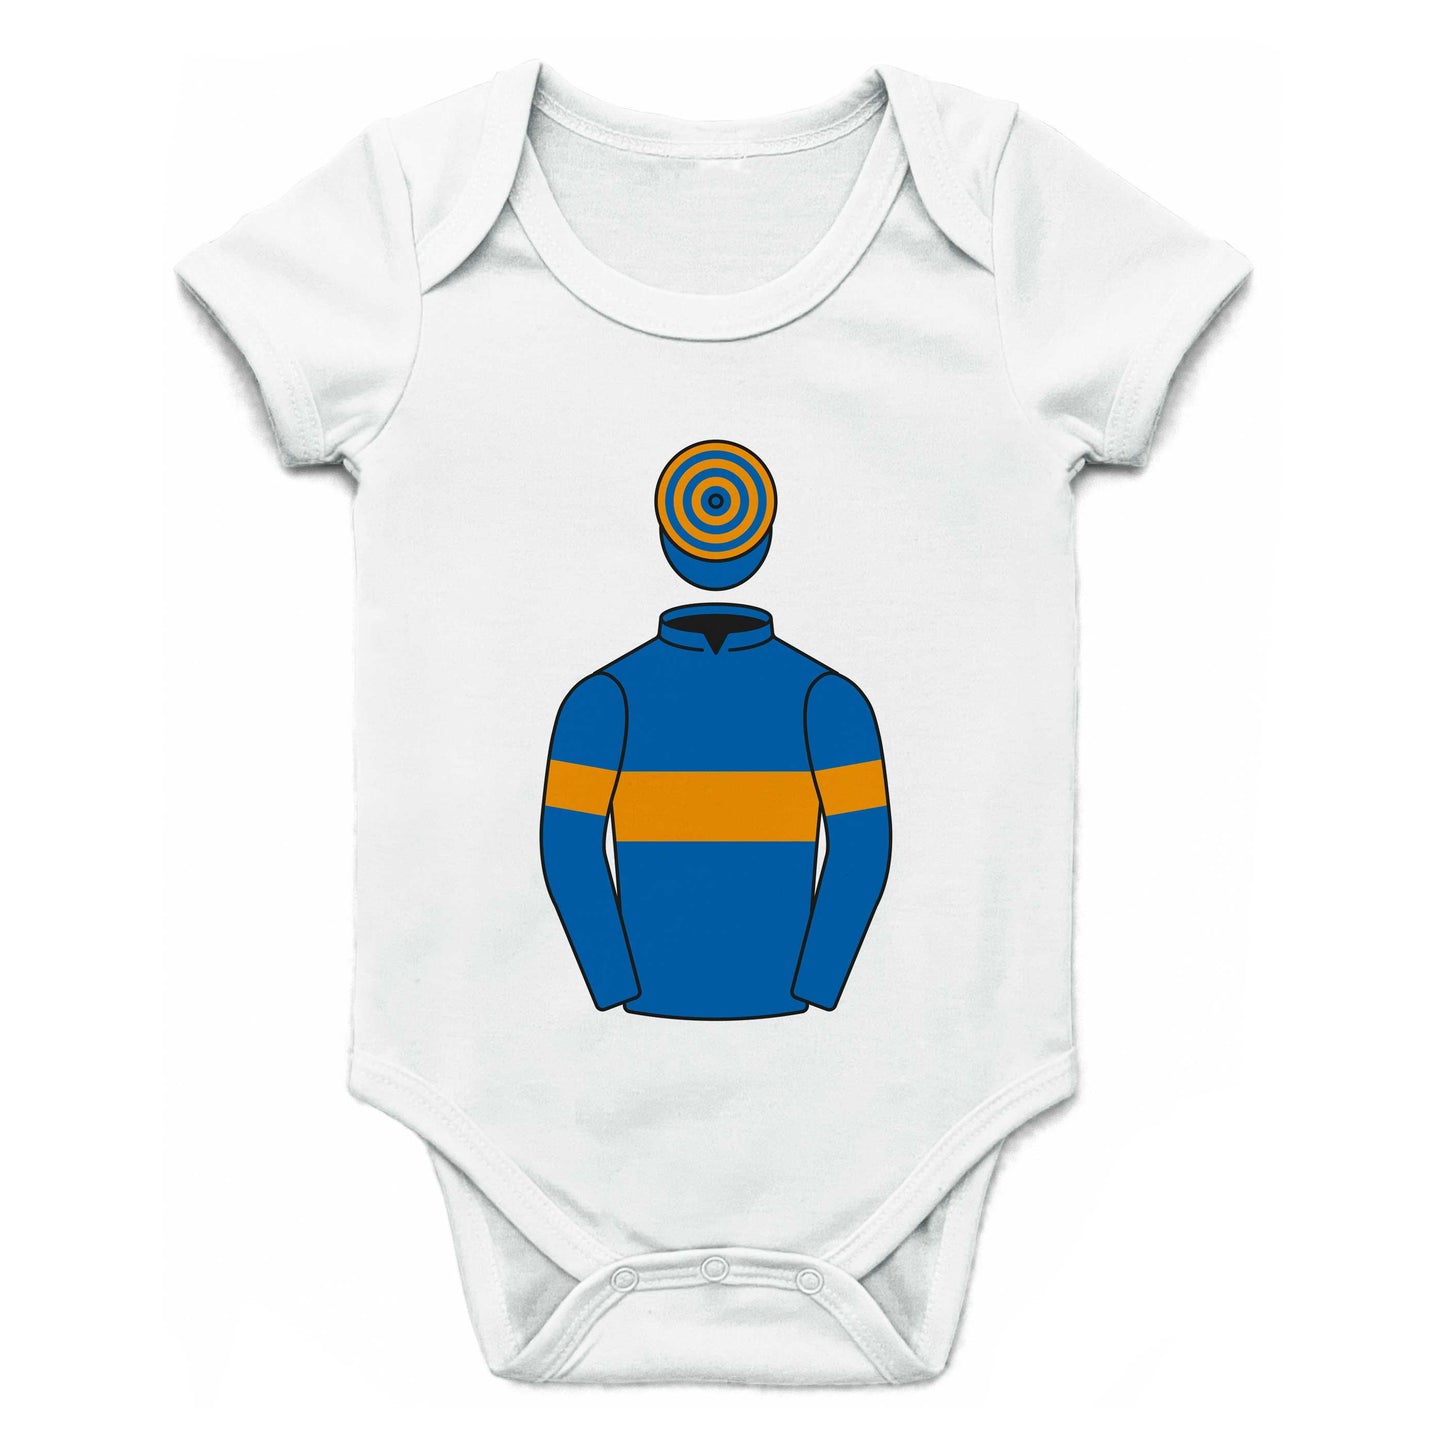 Andy Bell And Fergus Lyons Single Silks Baby Grow - Baby Grow - Hacked Up